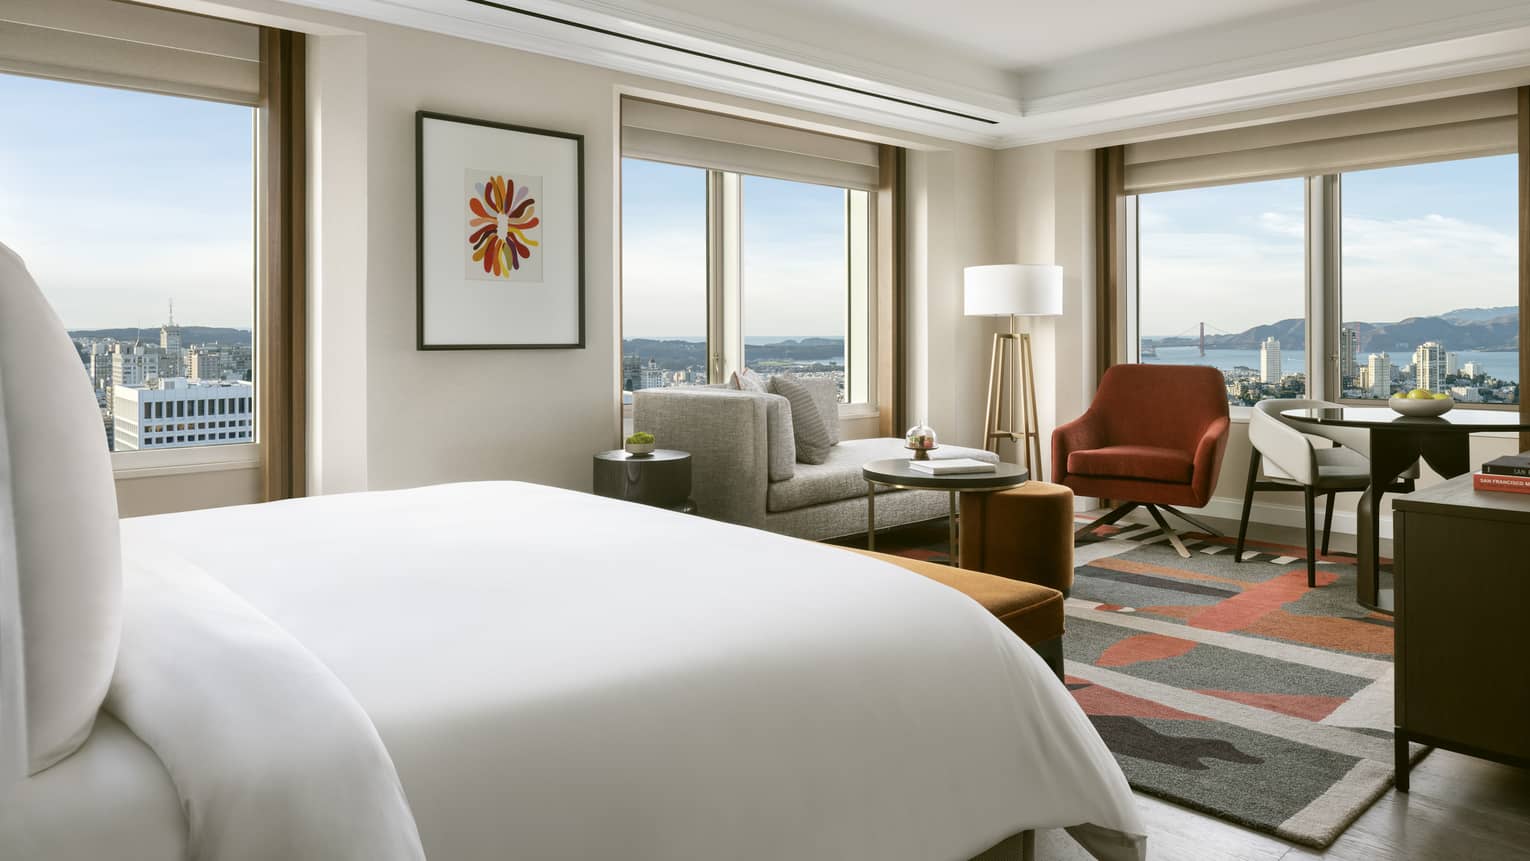 Modern hotel room with queen bed and corner views of San Francisco and bay